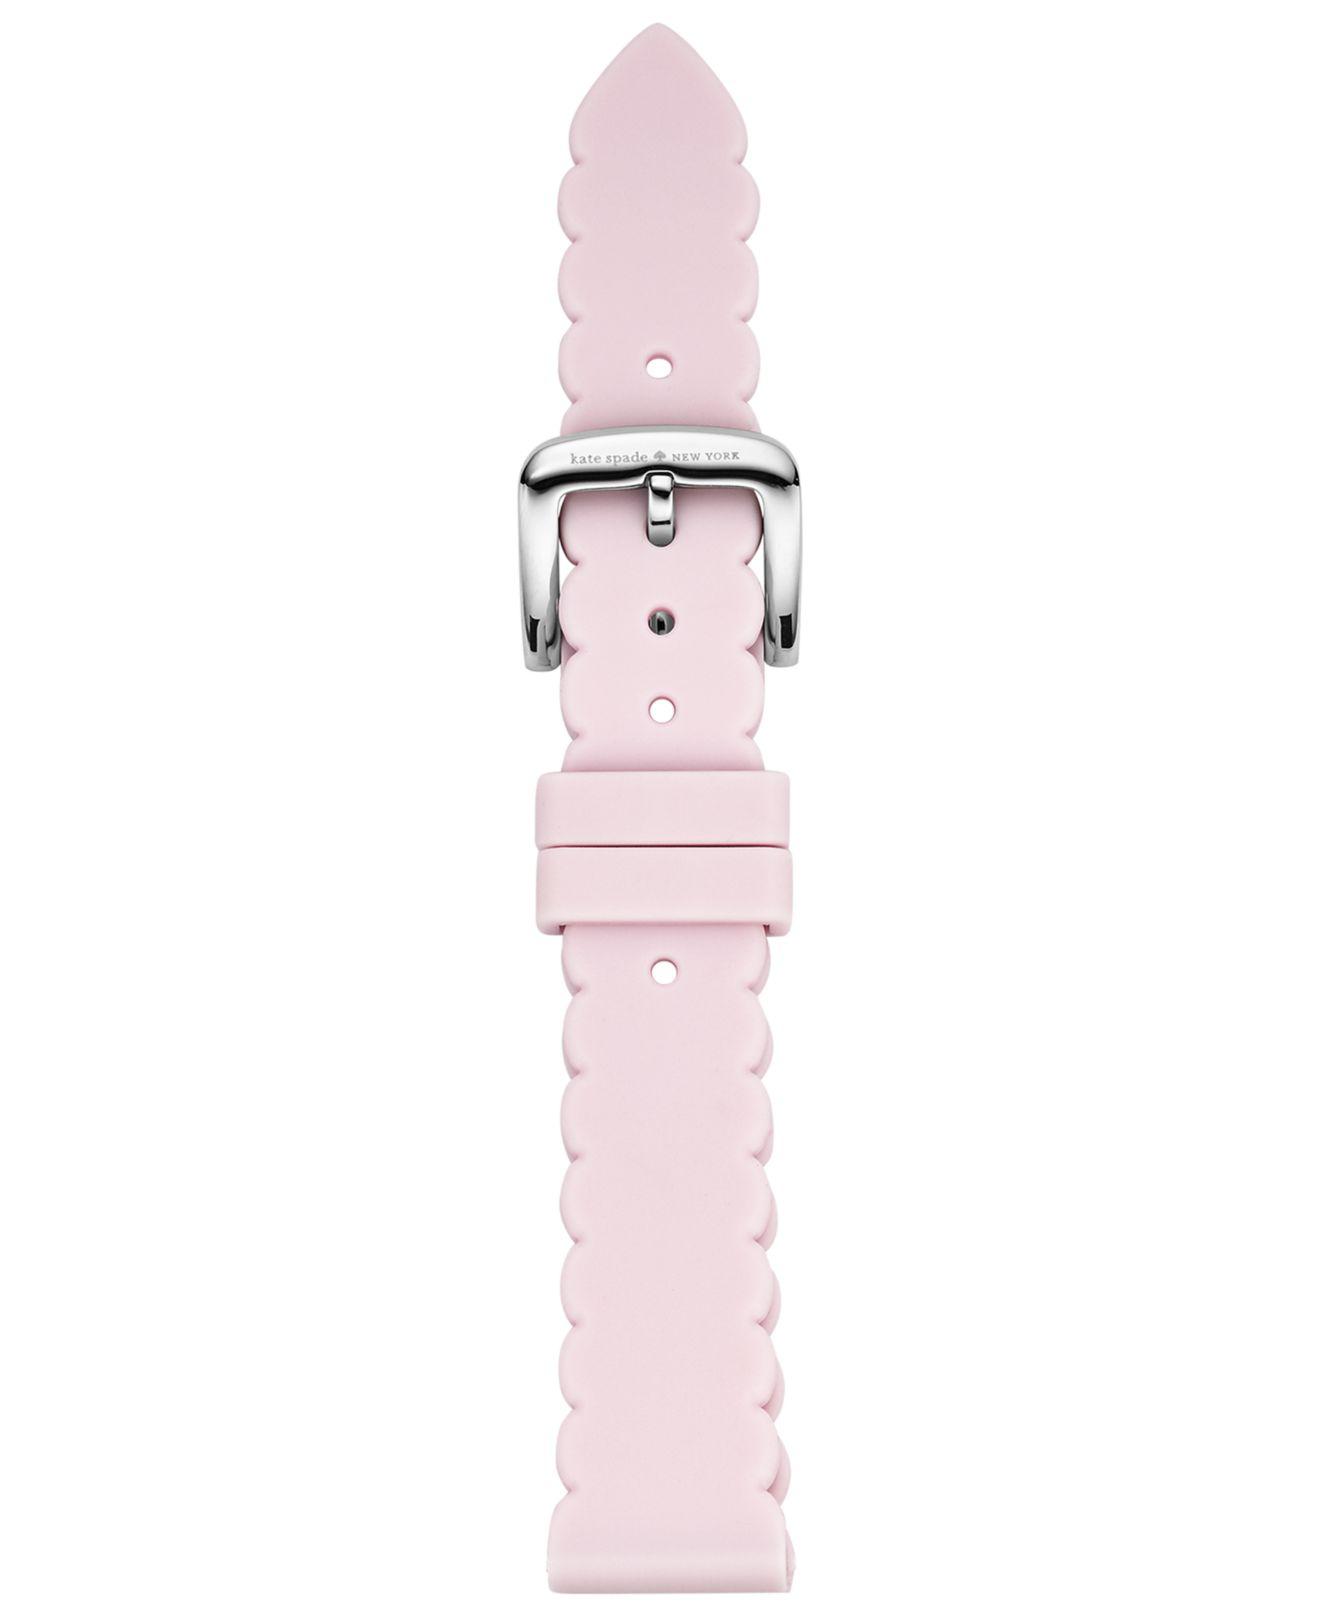 aflange Tale mælk Kate Spade Scallop Pink Silicone Smartwatch Strap | Lyst